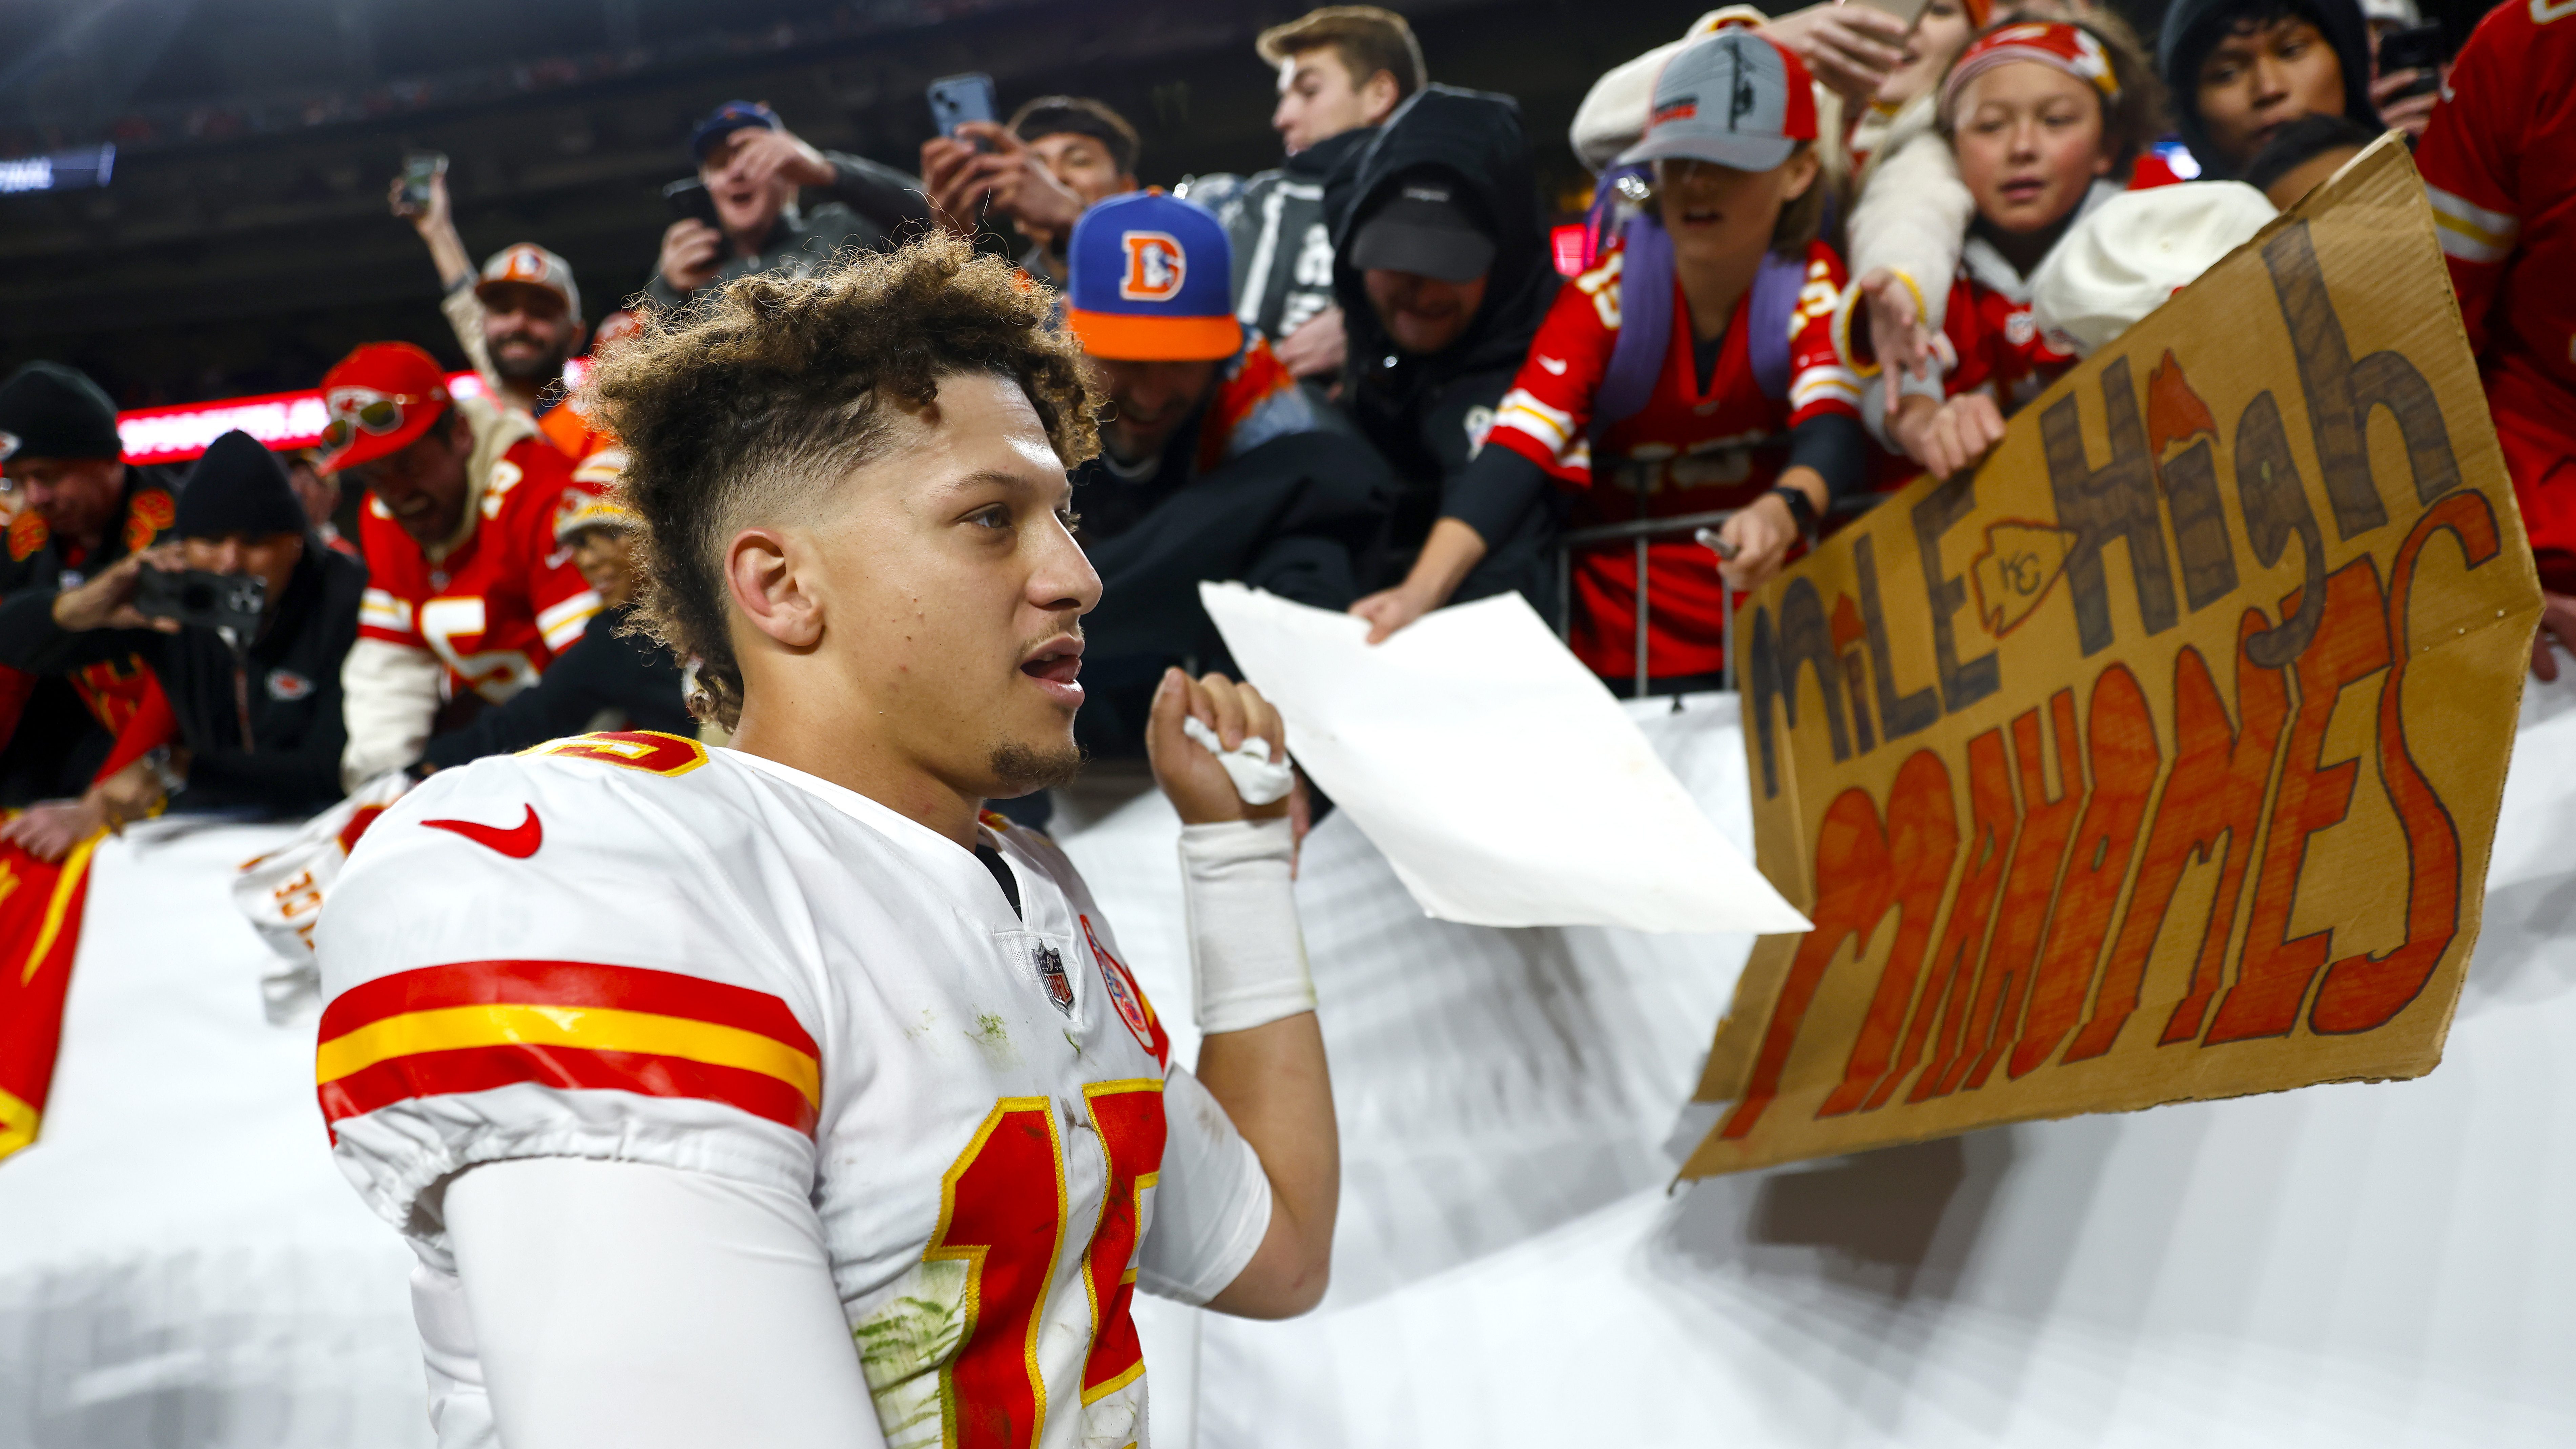 Patrick Mahomes and the Kansas City Chiefs have some famous fans - ESPN